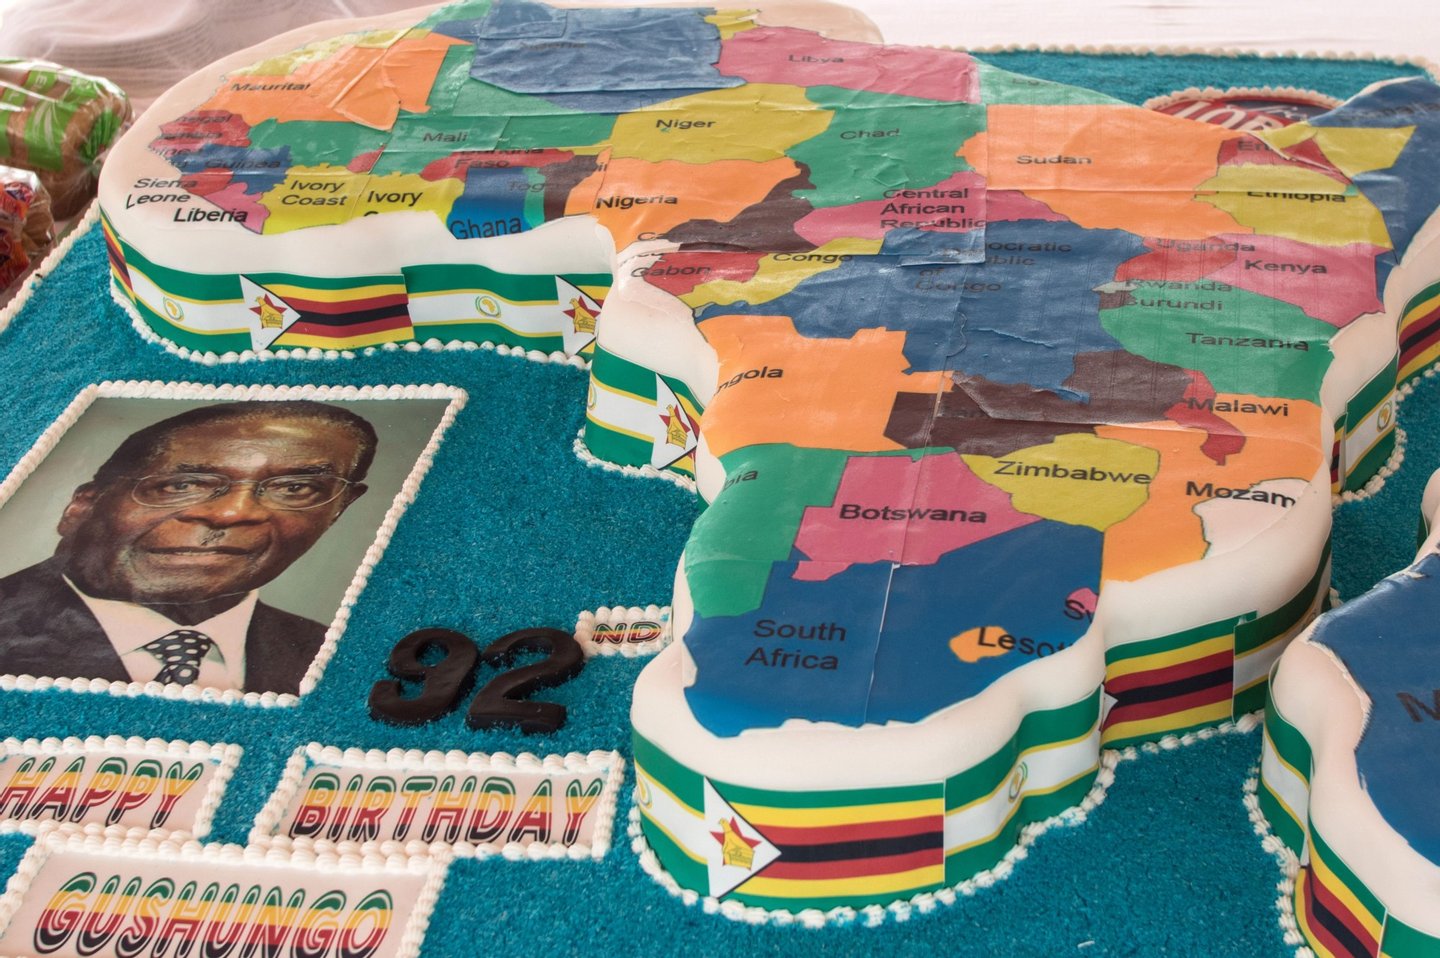 A picture shows Zimbabwean President Robert Mugabe's birthday cake in the shape of the map of Africa during celebrations marking his birthday at the Great Zimbabwe monument in Masvingo on February 27, 2016. / AFP / JEKESAI NJIKIZANA (Photo credit should read JEKESAI NJIKIZANA/AFP/Getty Images)